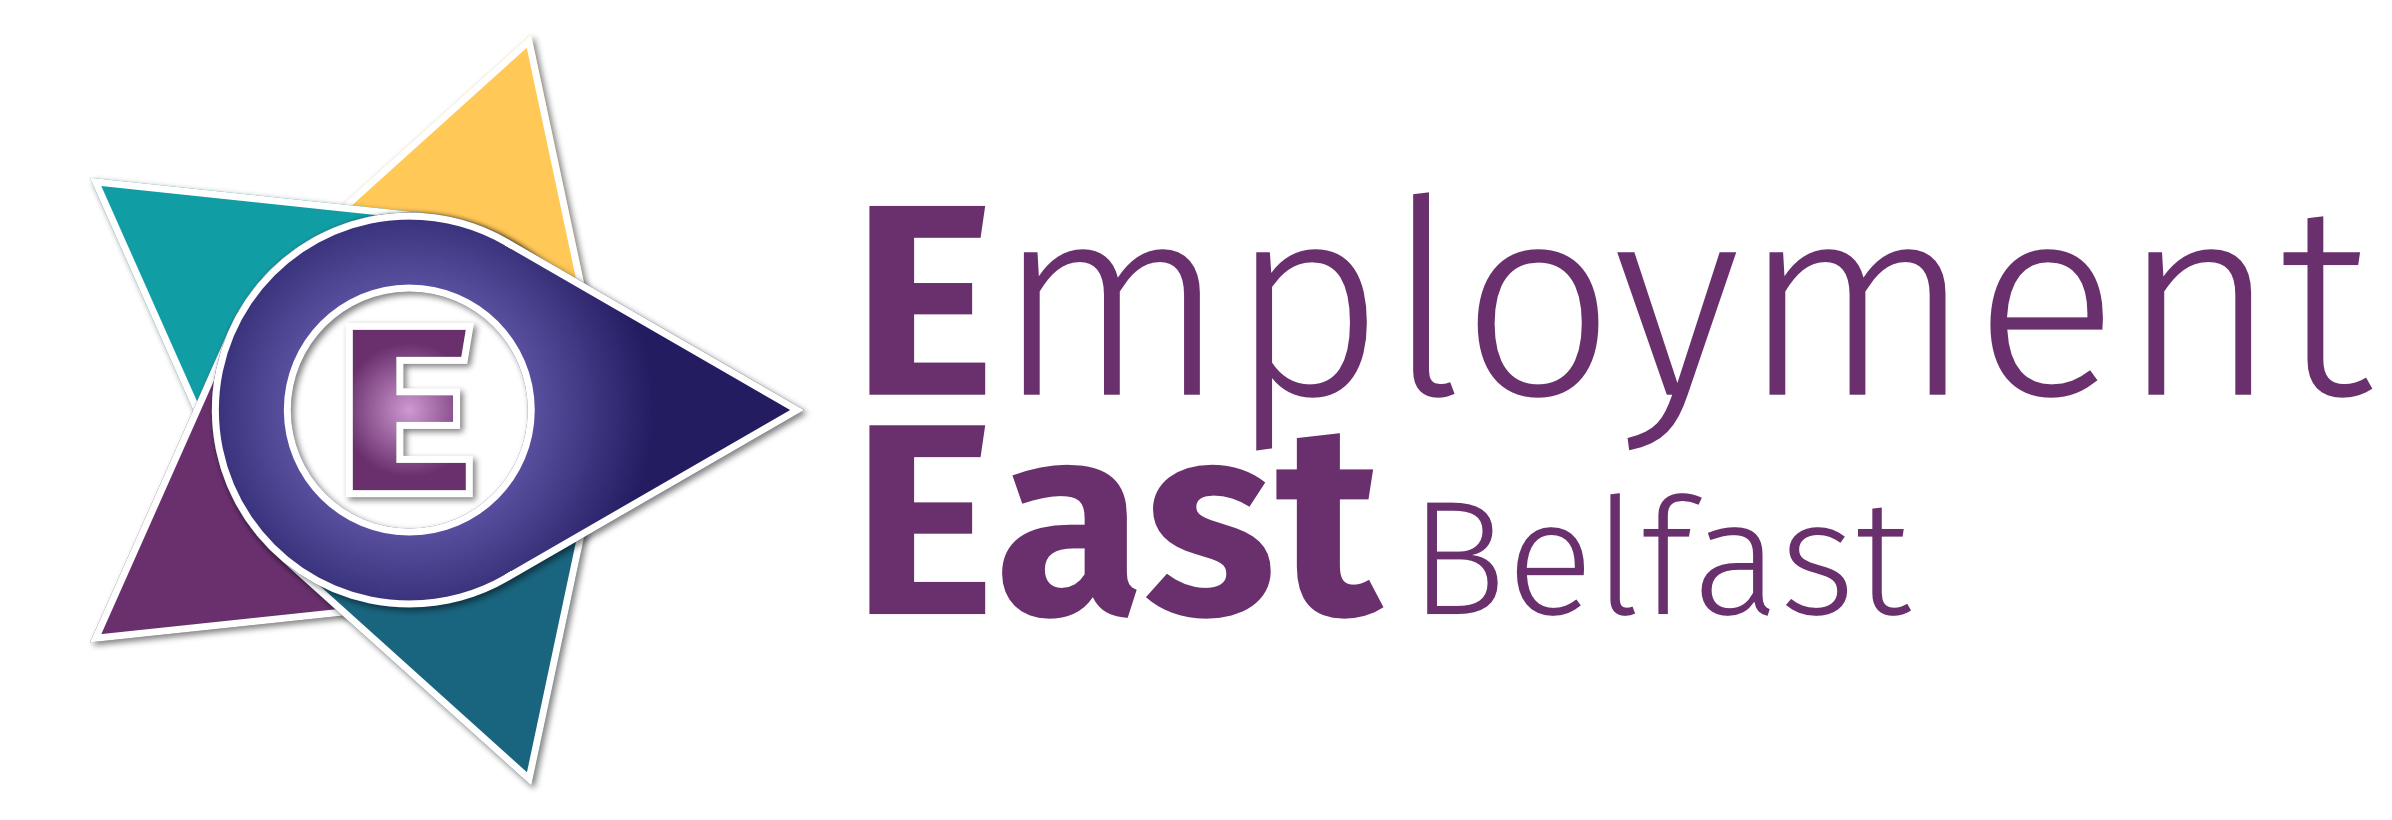 New funding available for Employers